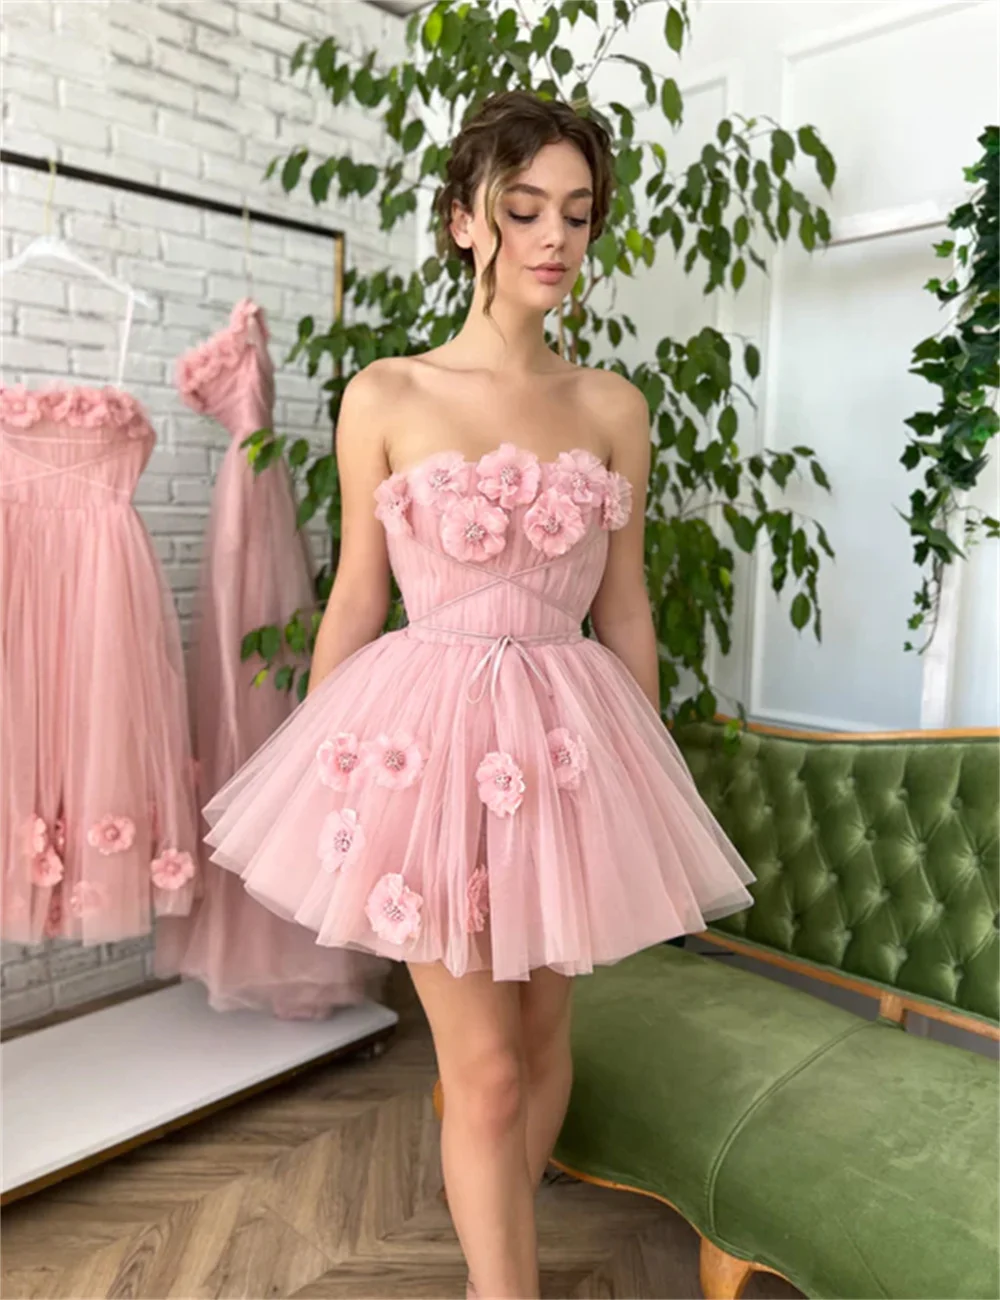 

Fancy A-Line Cocktail Dresses for Women Flowers Wedding Guest Mini Party Dresses Strapless Tulle with Floral Appliques 2023